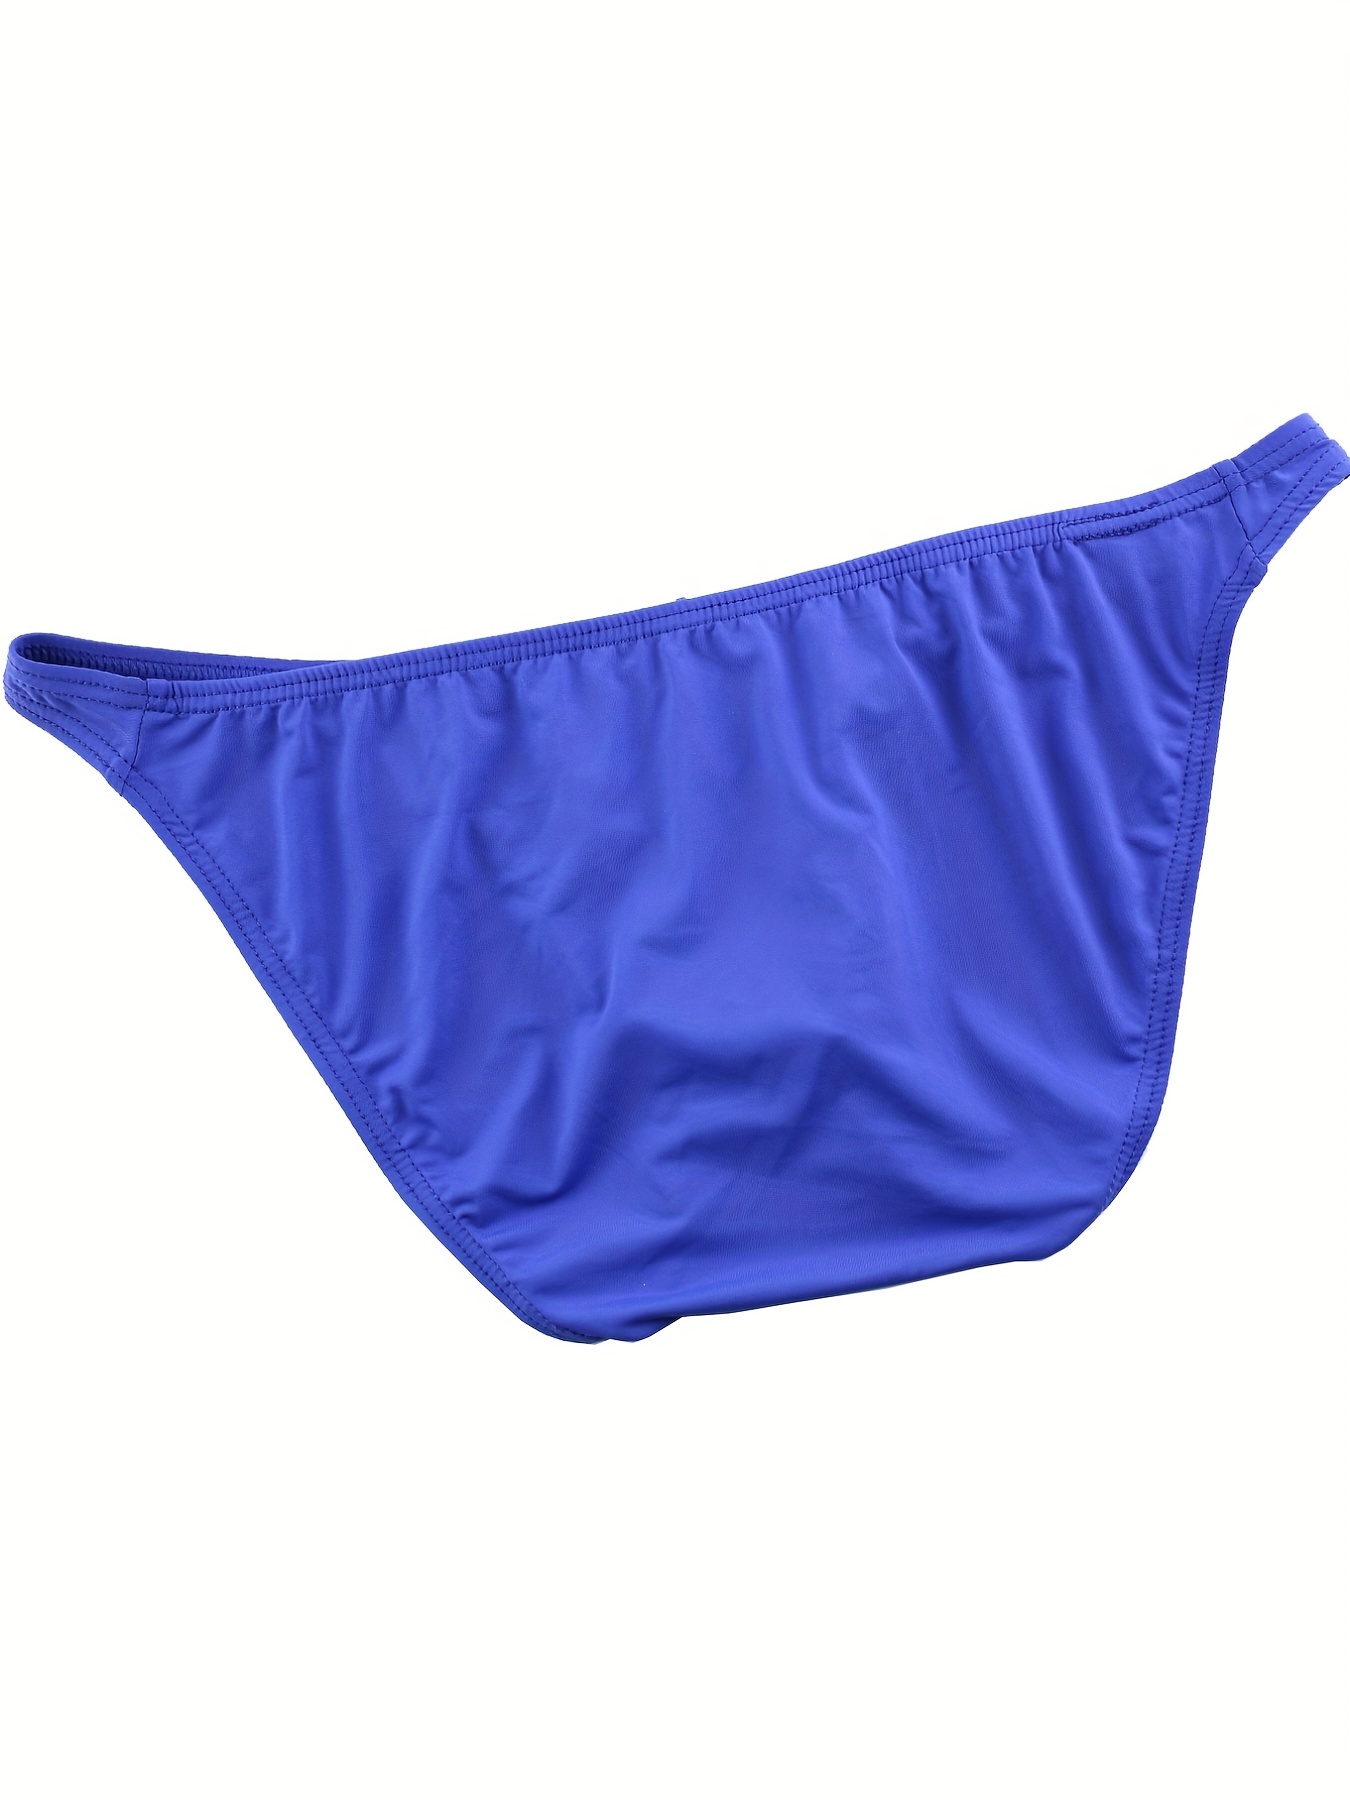 Blue Men`s Underpants Lying on the Floor, Knitted Underwear, Concept of  Comfortable Clothing, Scandal of Russian Special Services Stock Photo -  Image of basin, blue: 205841012